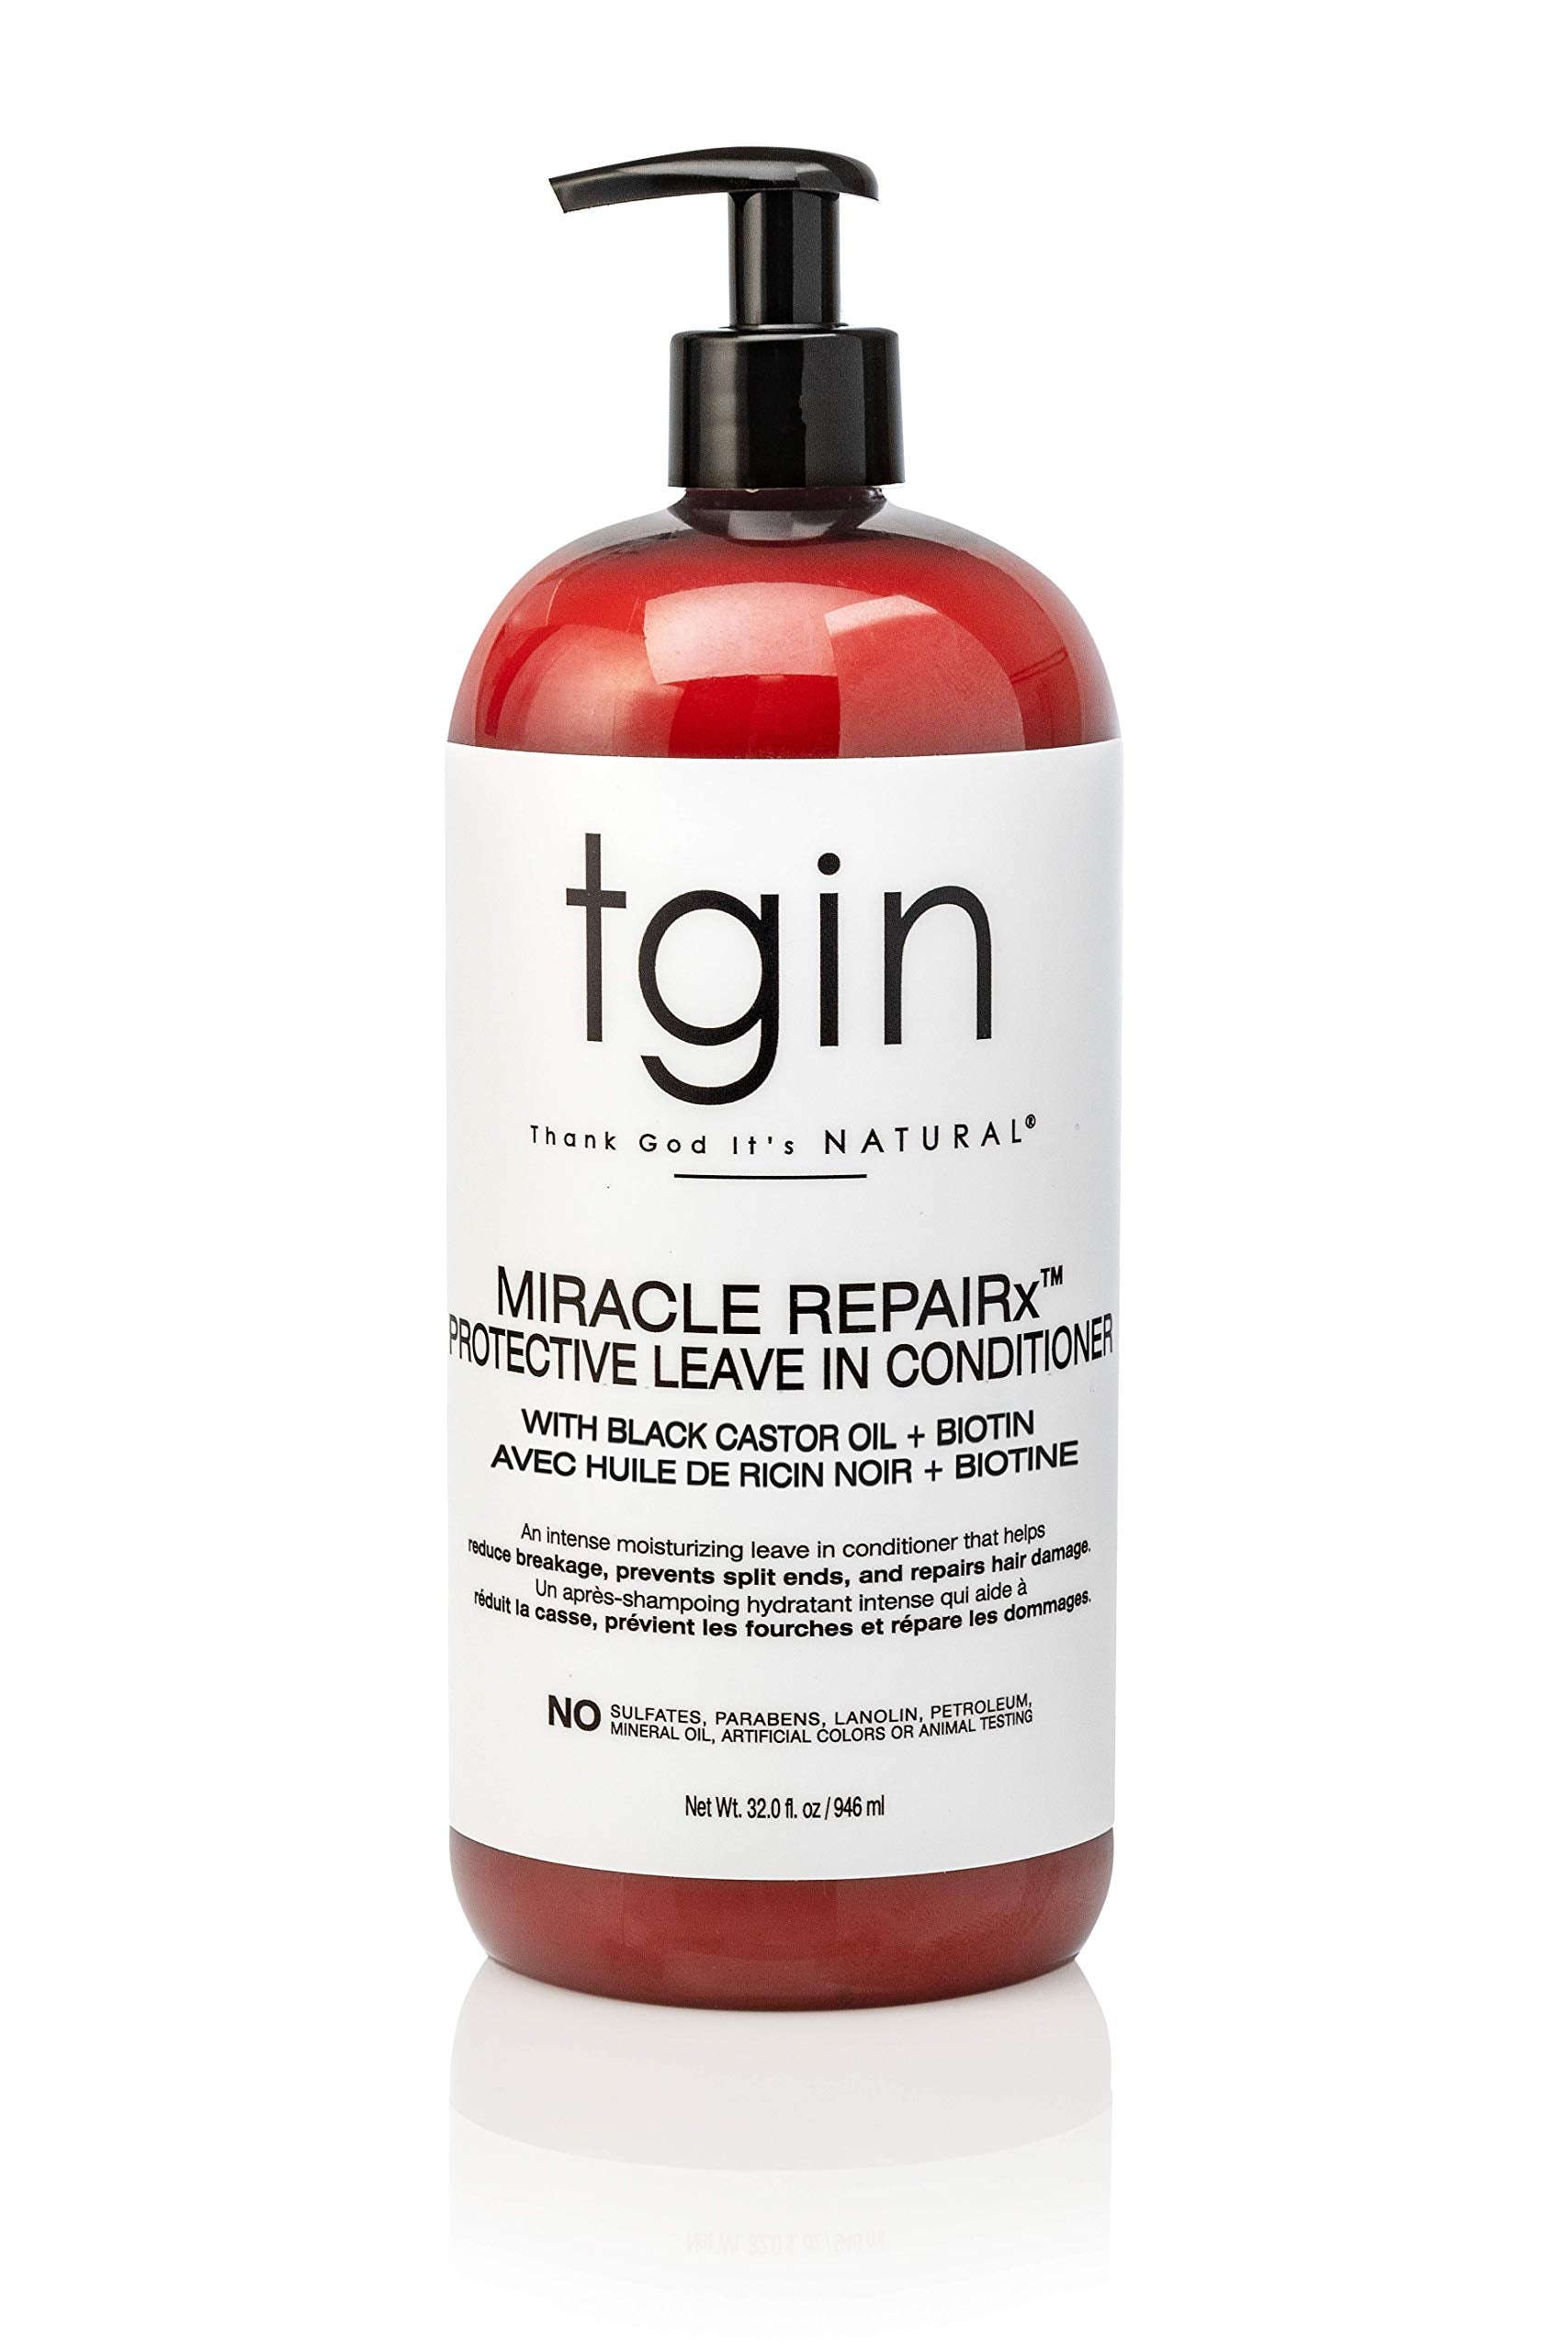 TGIN - Miracle RepaiRx Protective Leave in Conditioner – 32oz